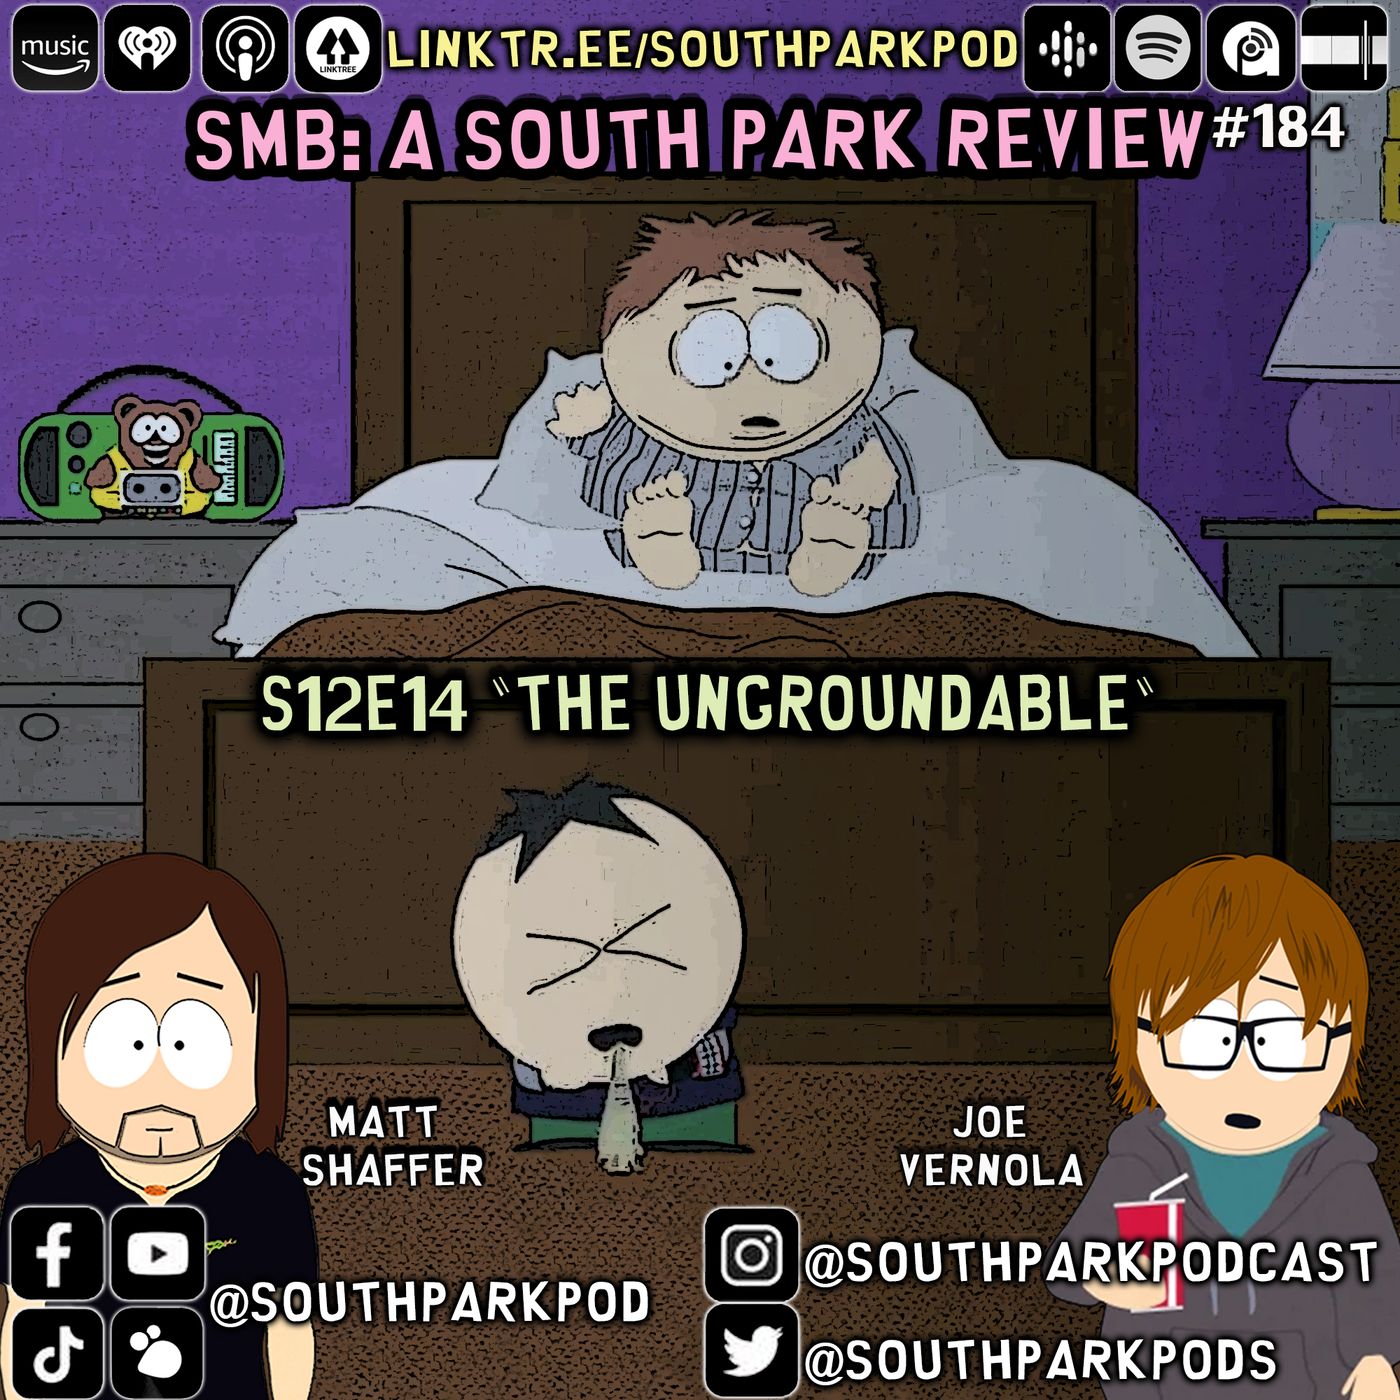 SMB #184 - S12E14 The Ungroundable - ”I Think It’s Time For Us To Feed, Per Se.”